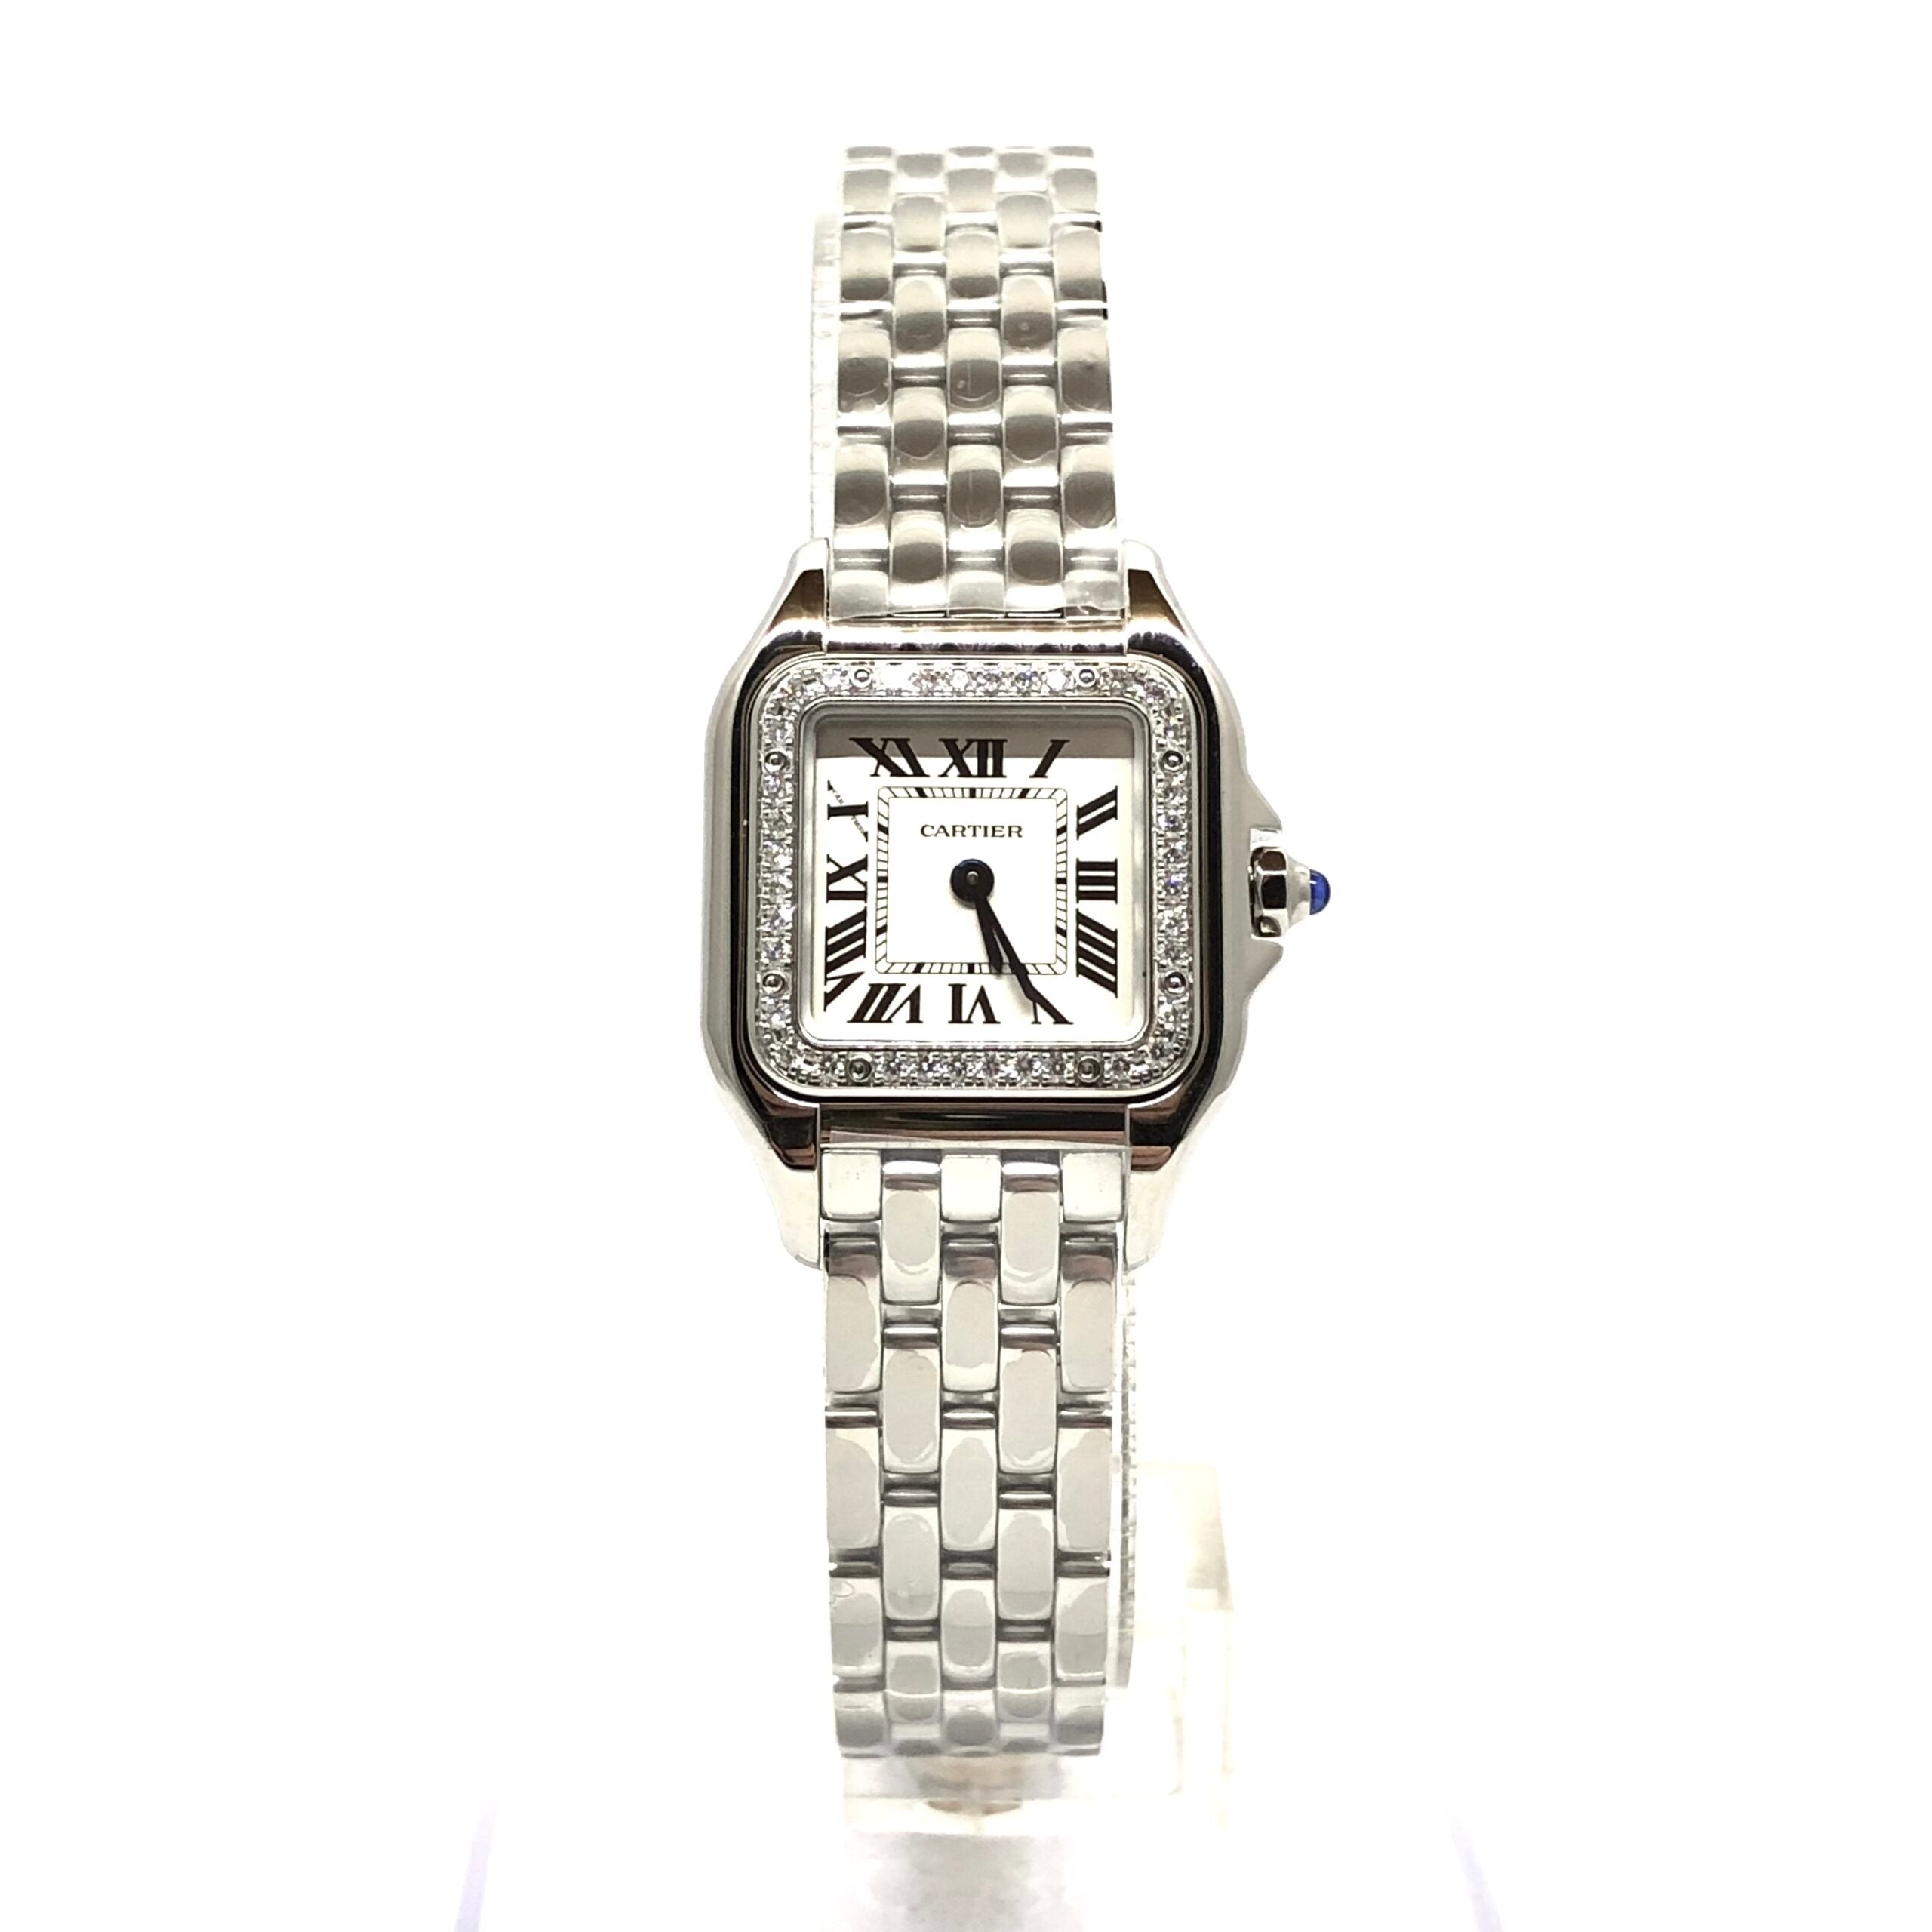 Cartier Panthère Stainless Steel & Diamonds Small Model Ladies Watch